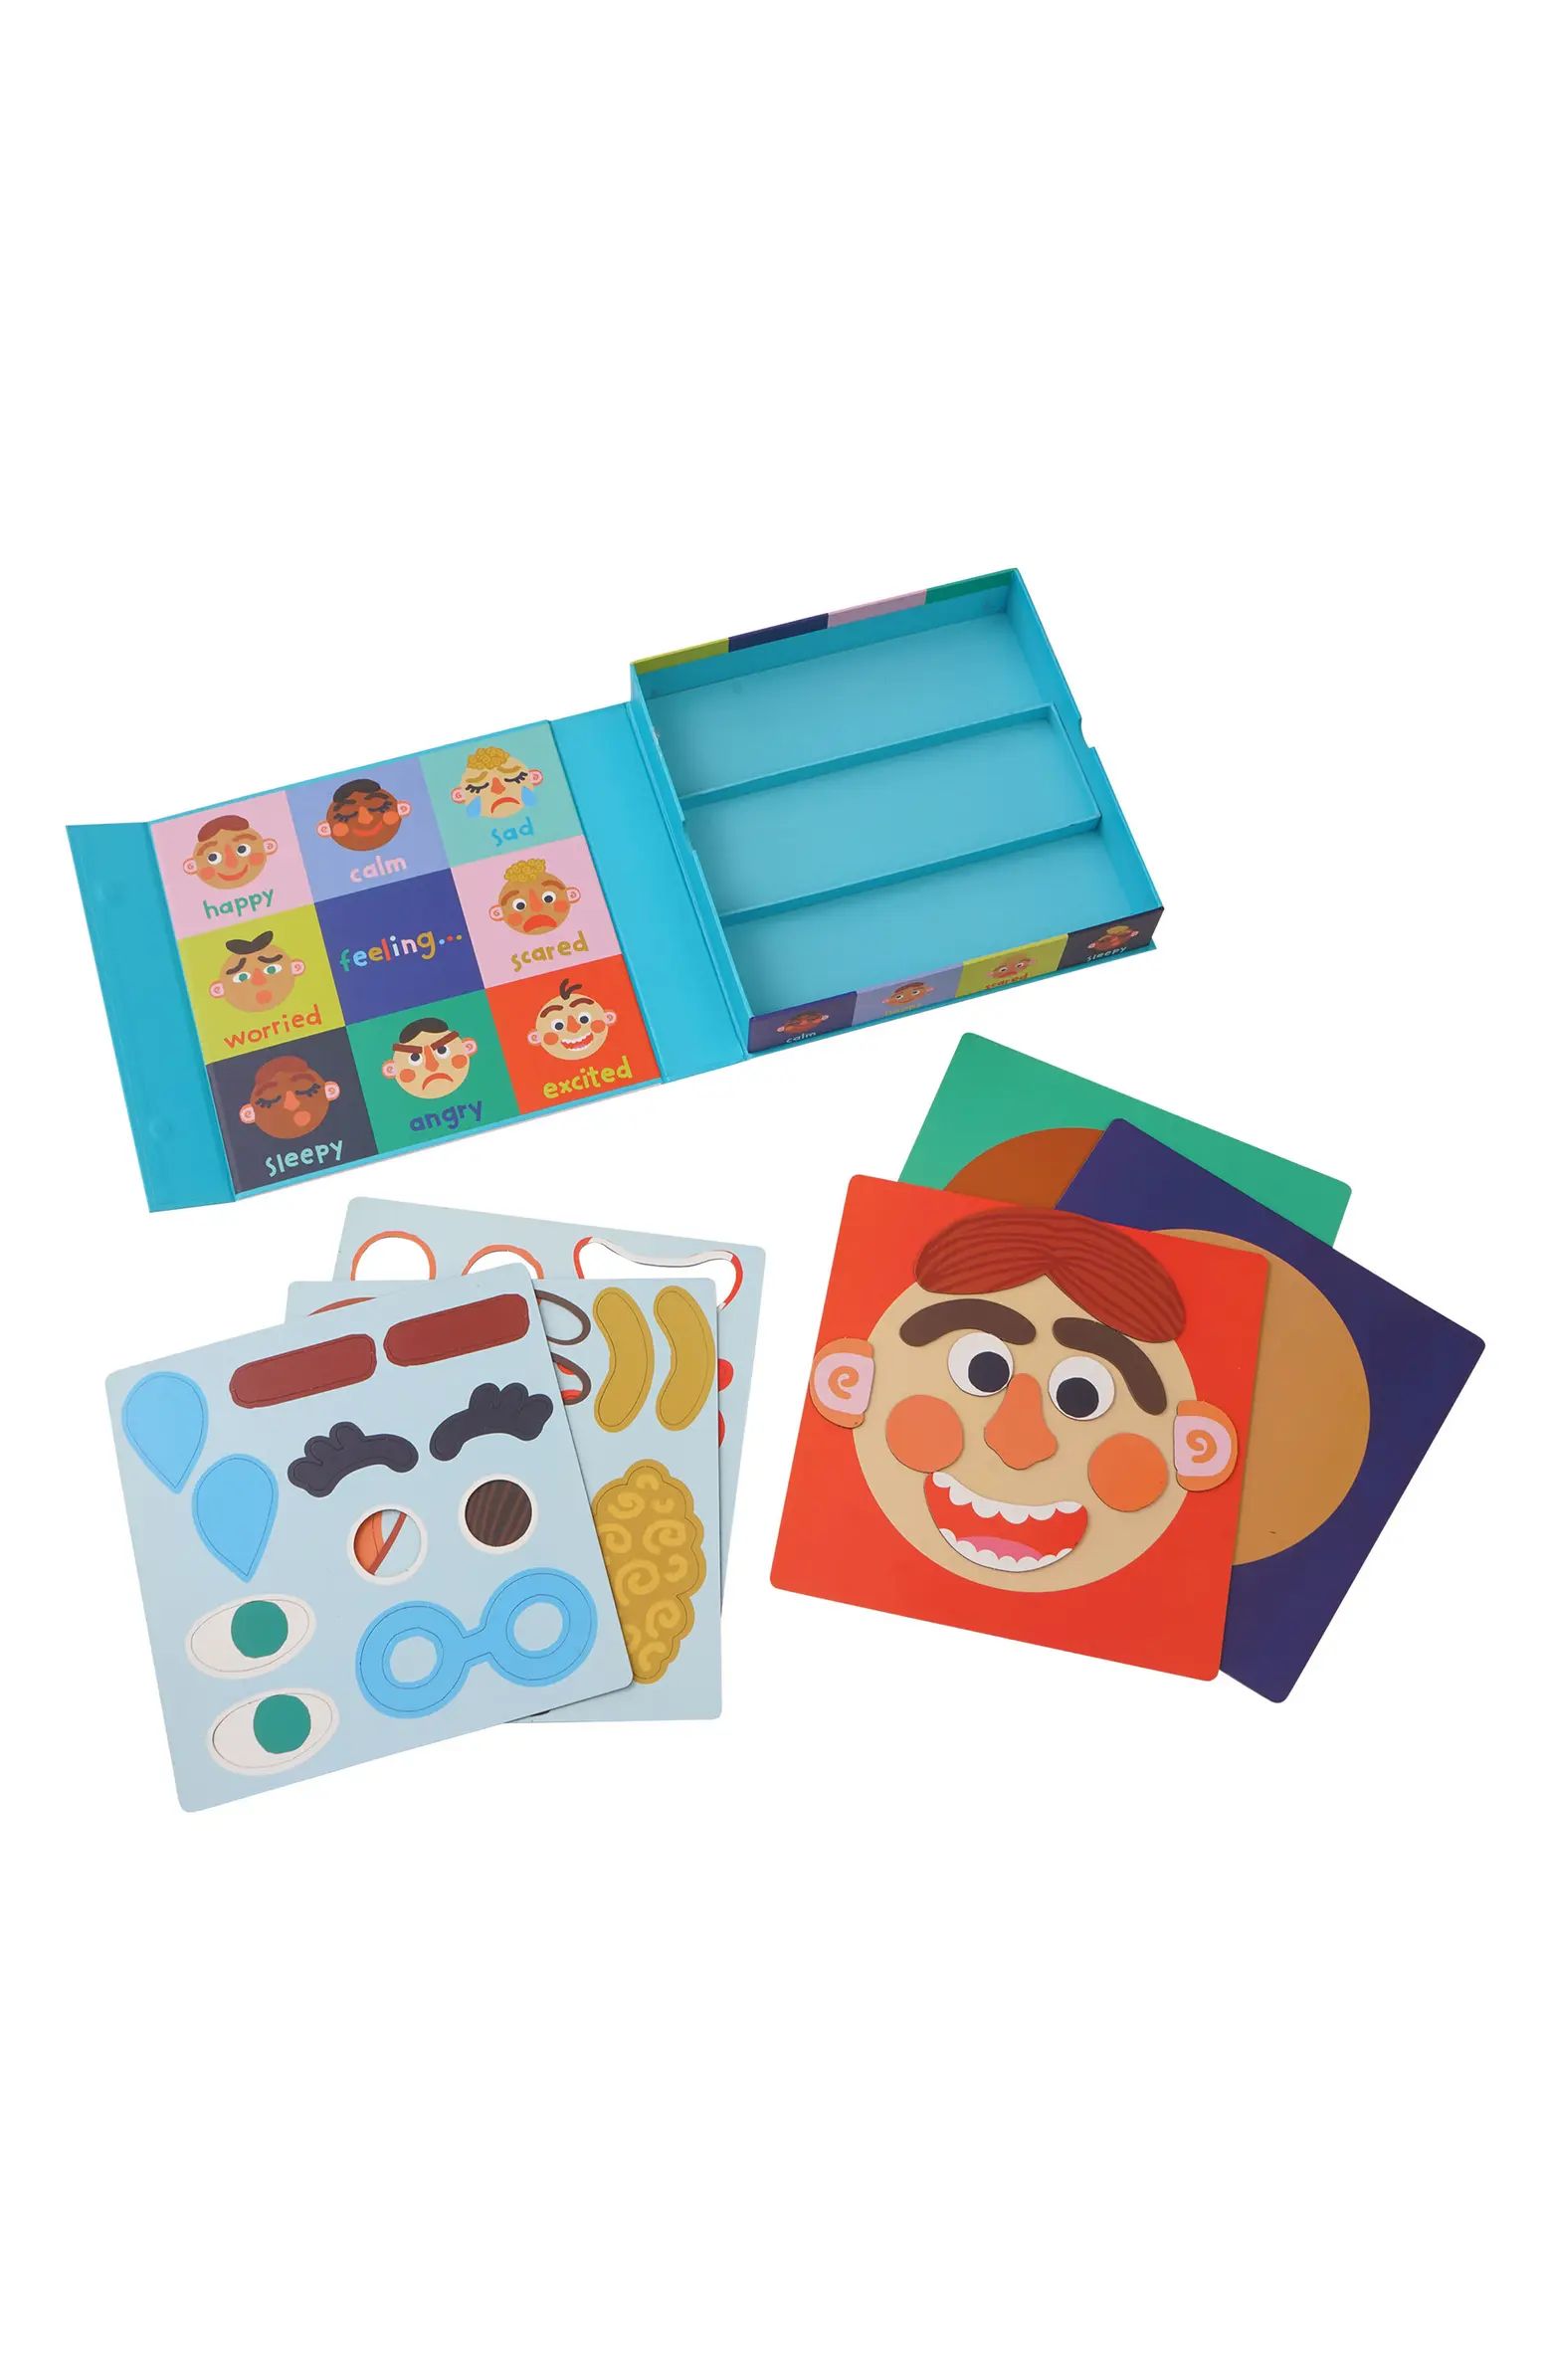 Making Faces Magnetic Playset | Nordstrom